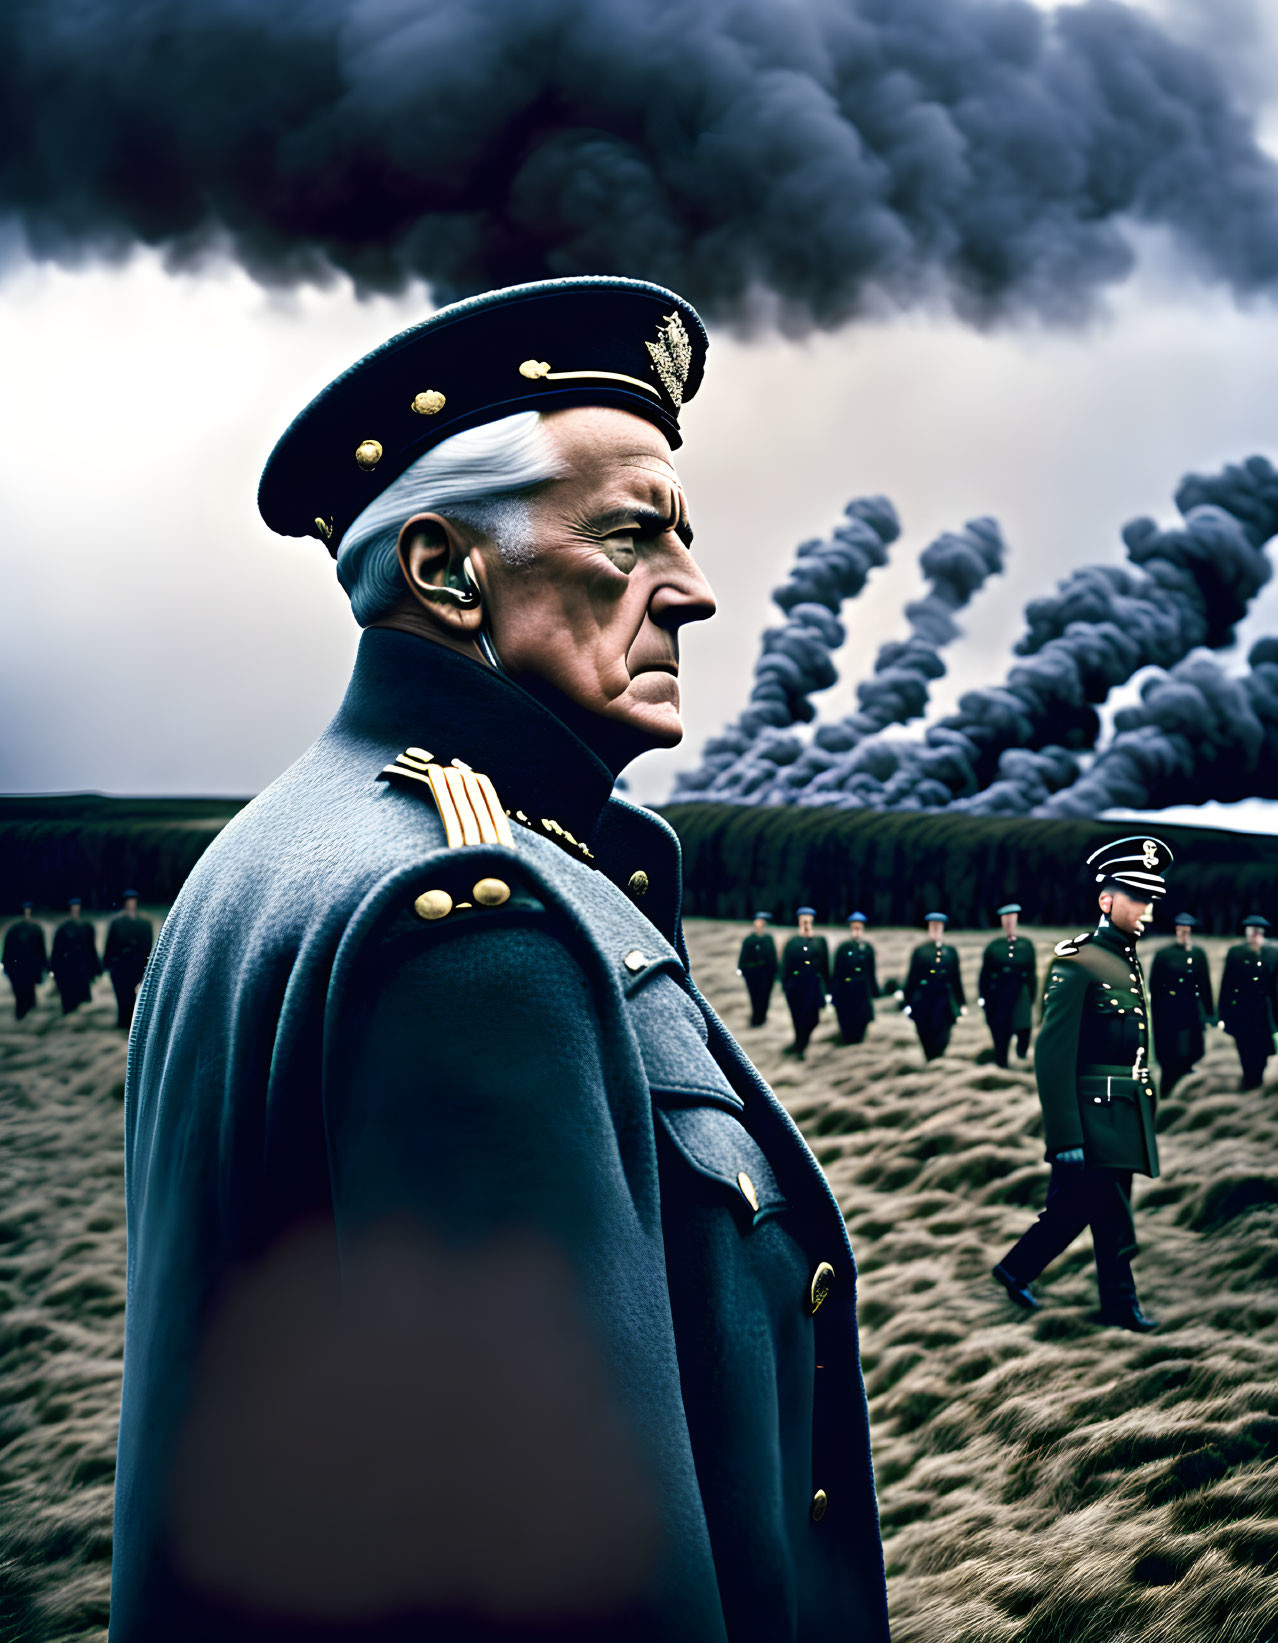 Older Military Officer in Blue Uniform with Troops and Smoke Background